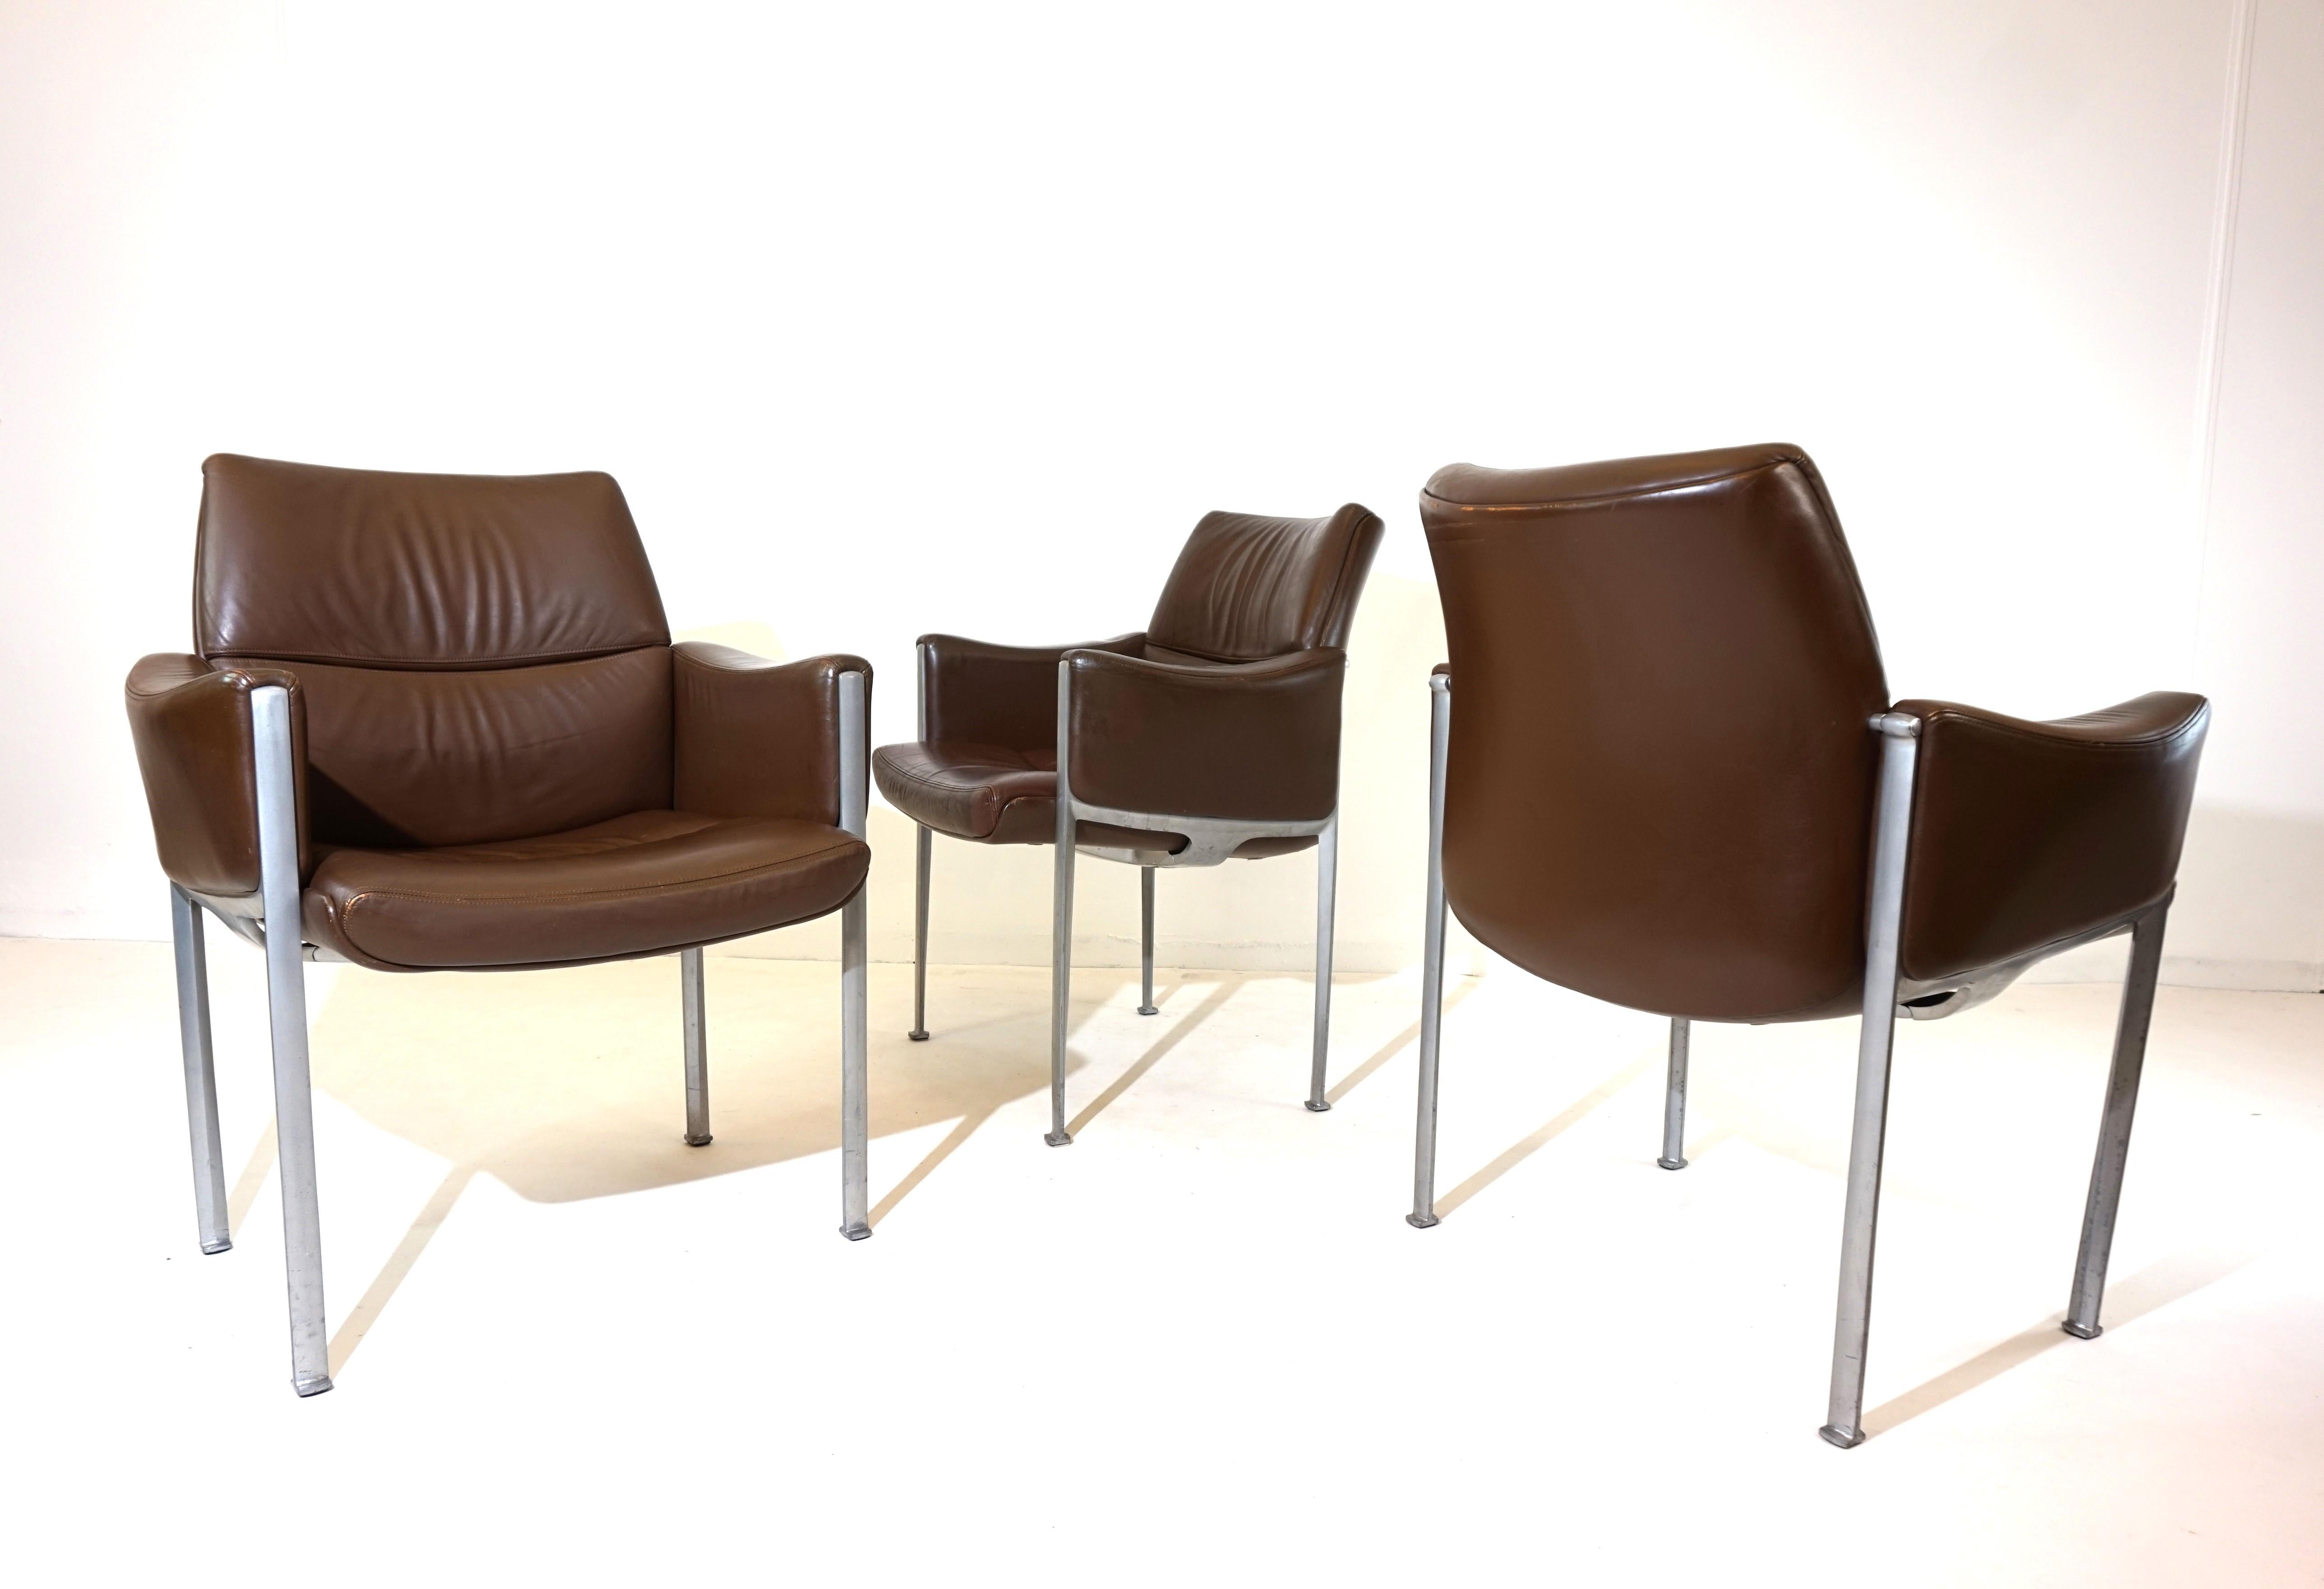 A set of 3 leather chairs with a solid metal frame from Röder Söhne in very good condition. The soft, brown leather of the seat and back cushions, as well as the wide armrests, only shows slight signs of wear. The back shells, also covered with